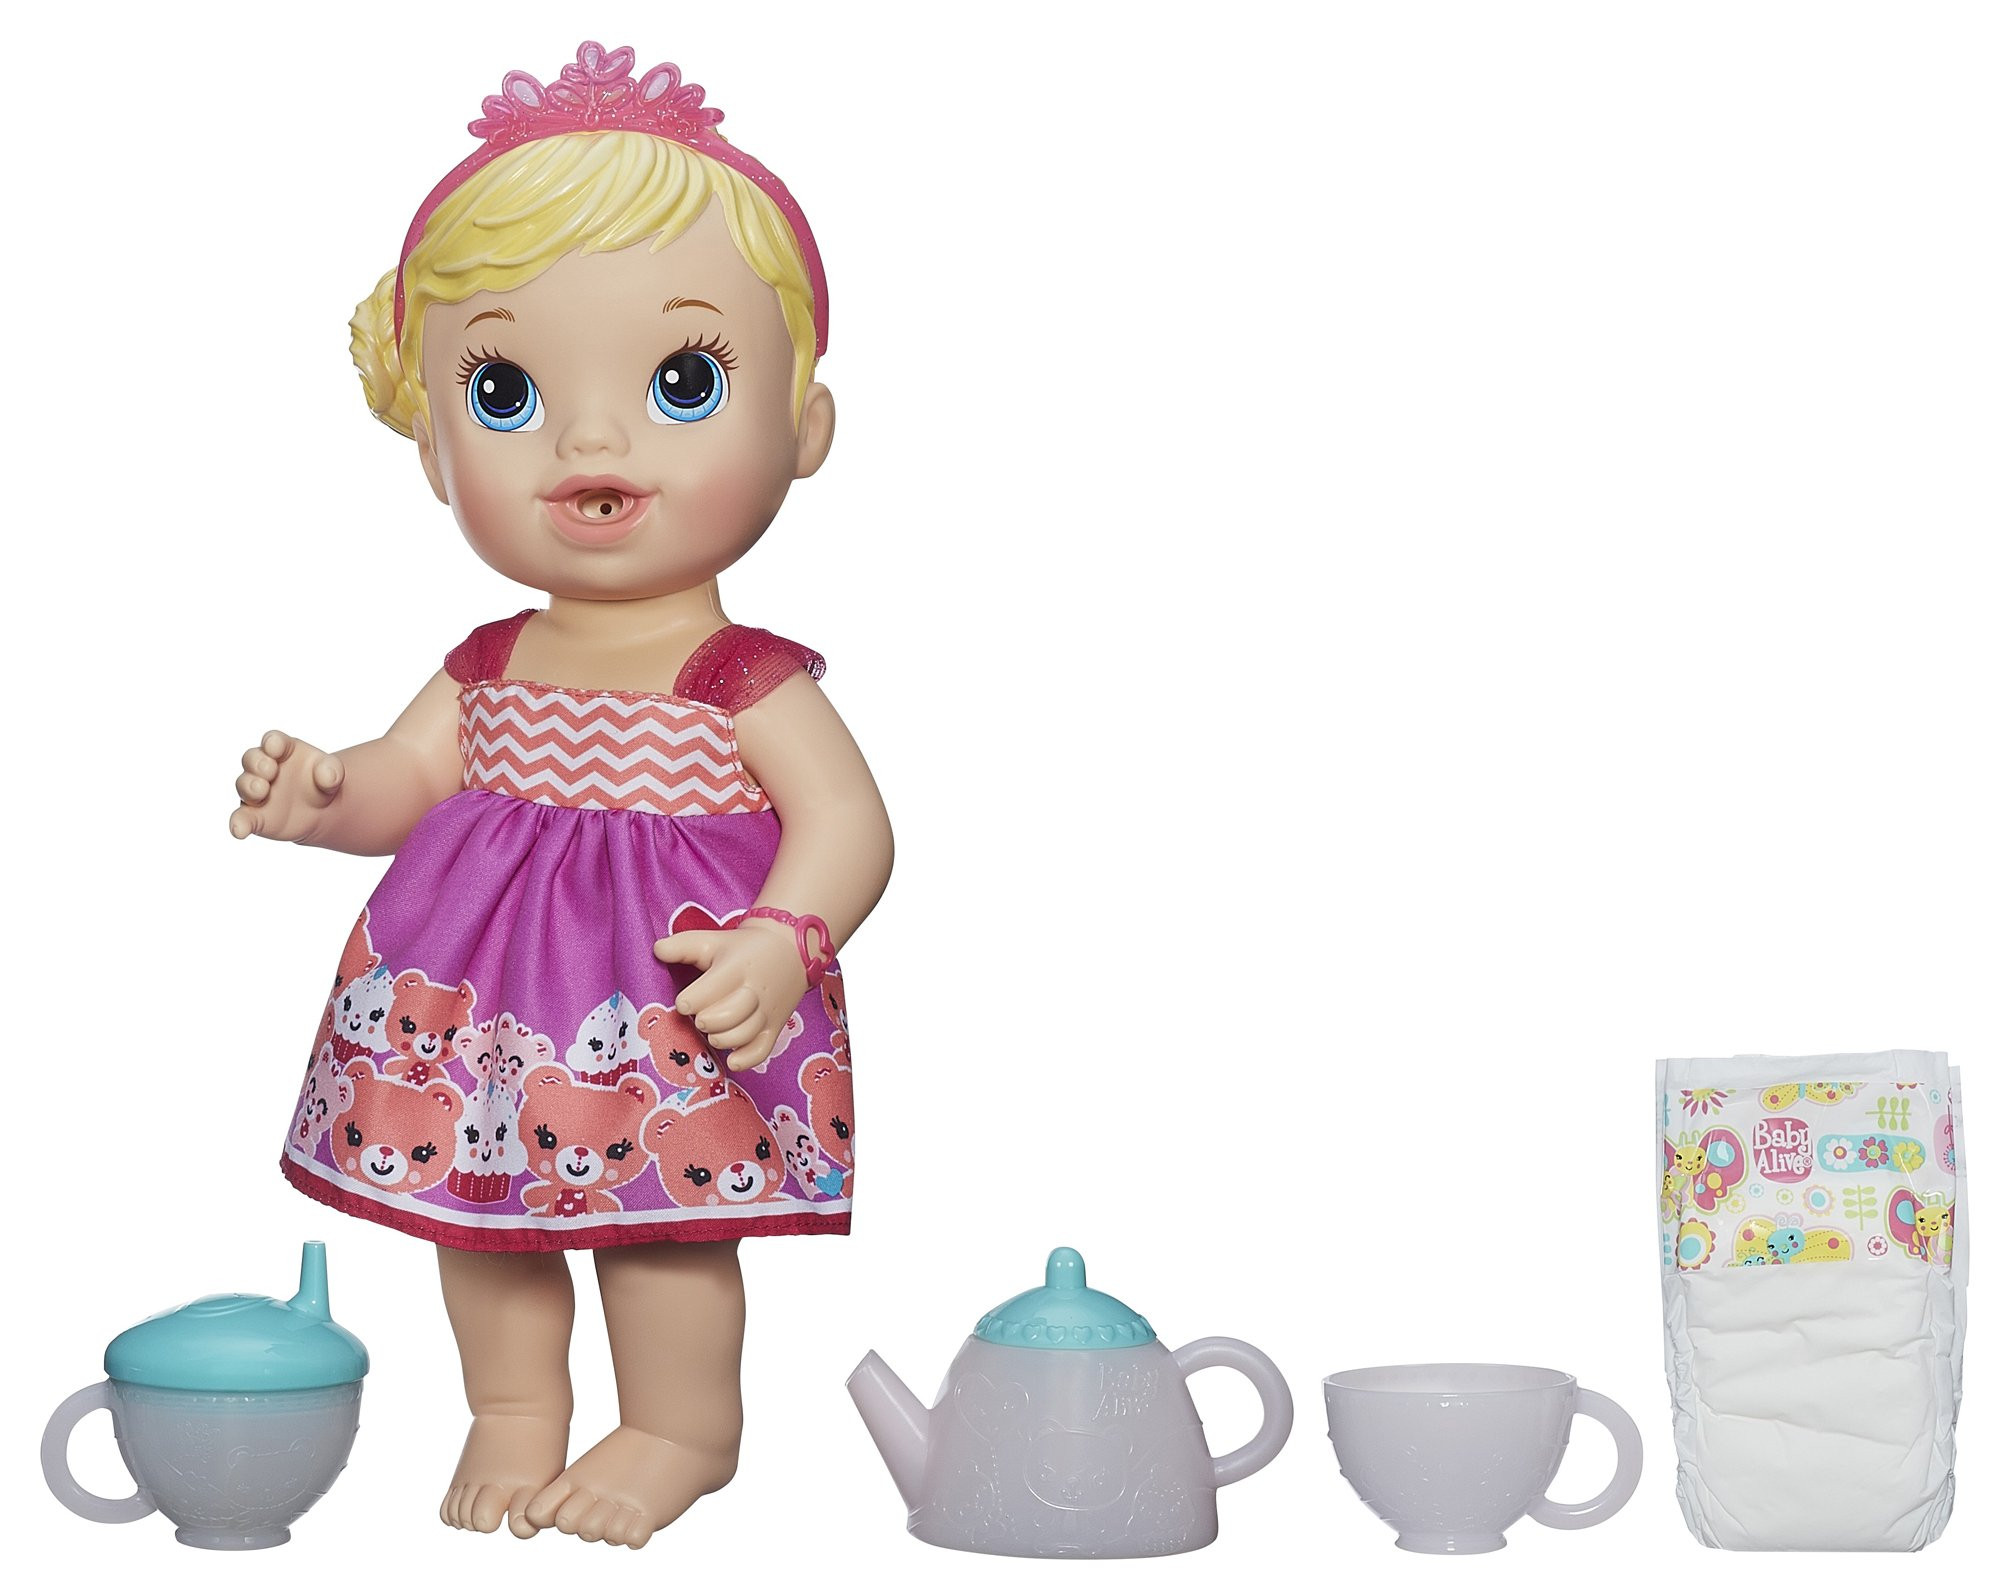 Baby Alive Tea Party Doll
 Baby Alive Lil Sips Baby Has a Tea Party Doll – Blonde